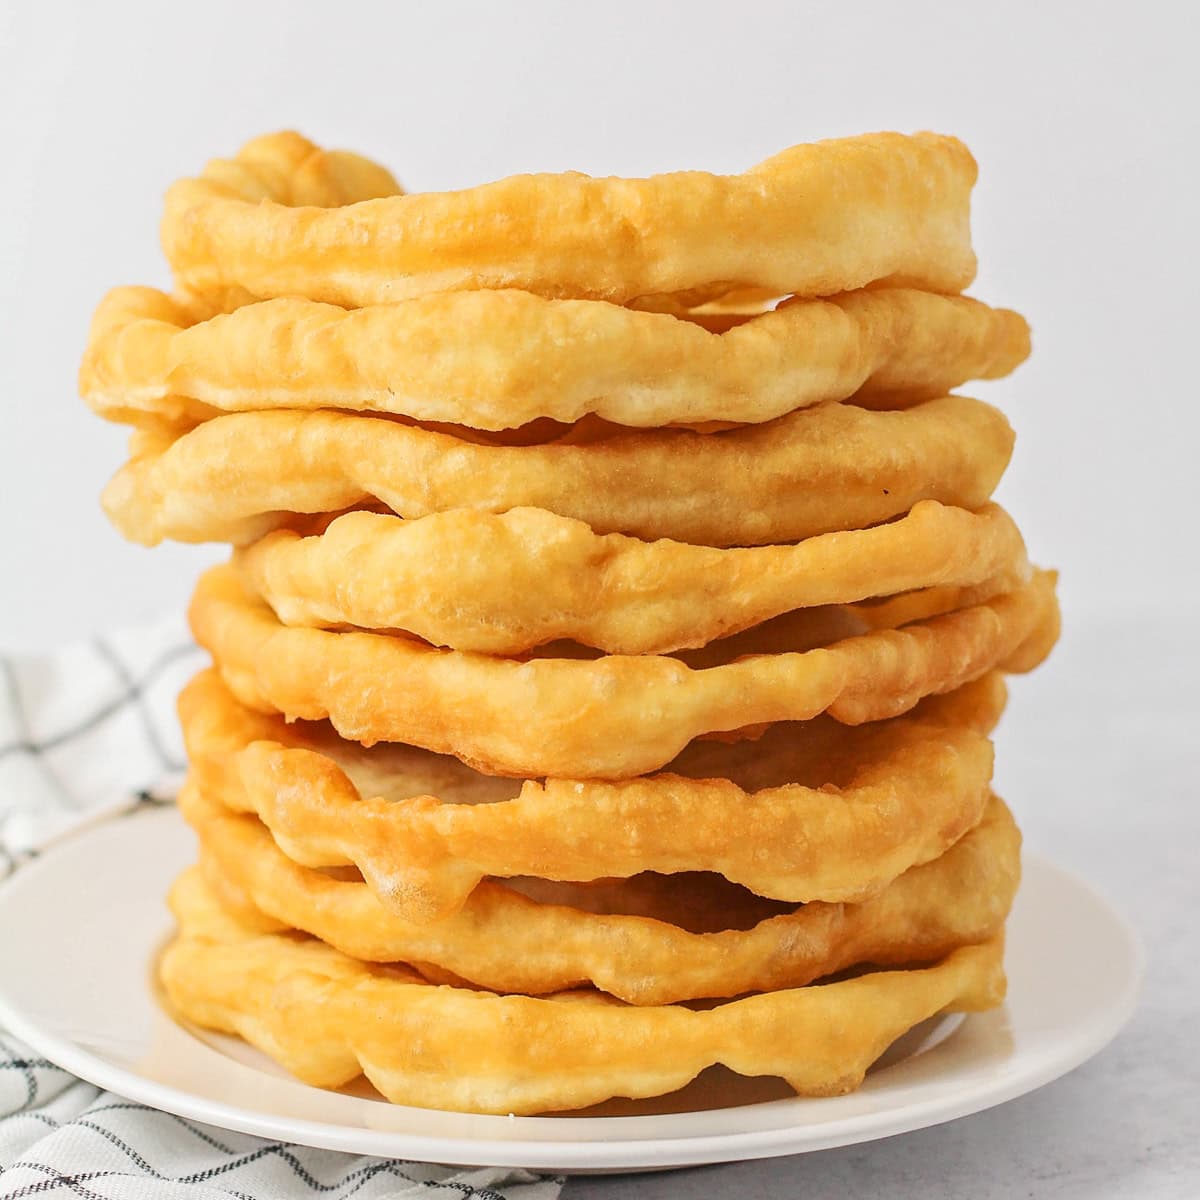 Fry bread stacked on top of each other on white plate.